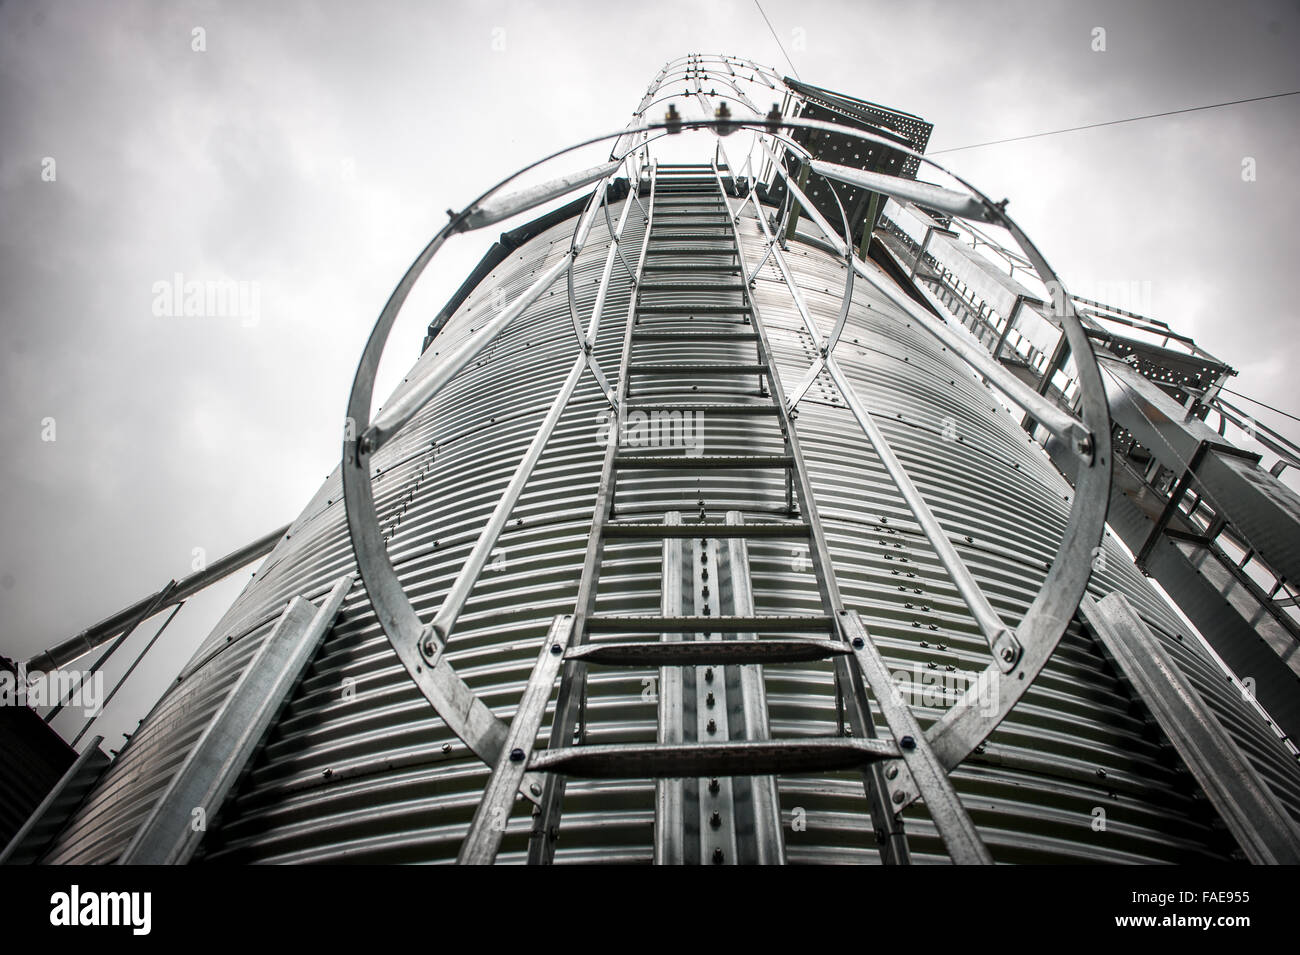 Looking up through a ladder entrance on a silo Stock Photo